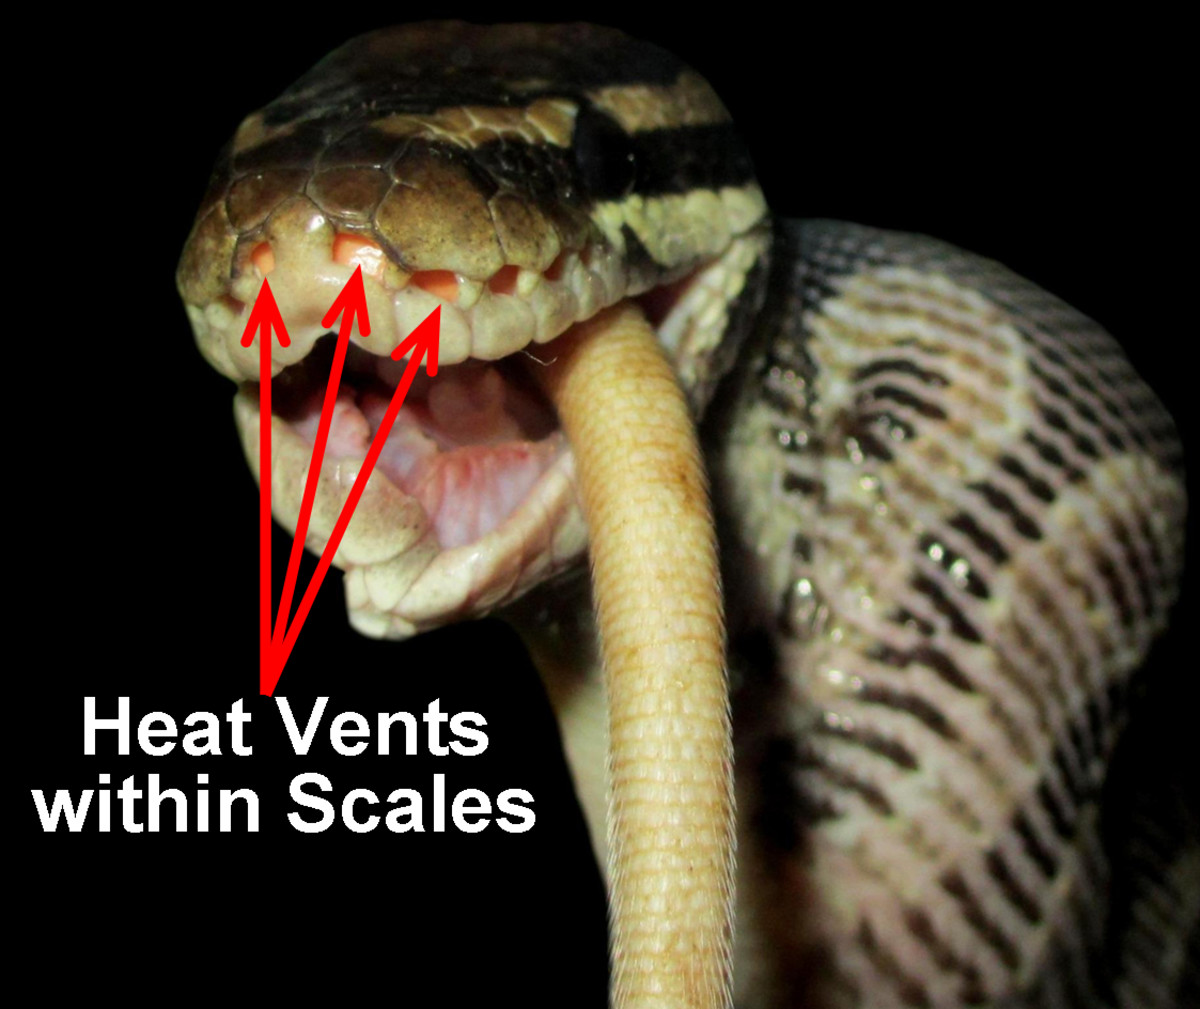 A Ball Python (Python regius), emphasizing its heat-sensitive vents, which are located within its labial scales. Boa Constrictors, on the other hand, possess heat vents between the labial scales. This snake is swallowing the last bits of a rat.